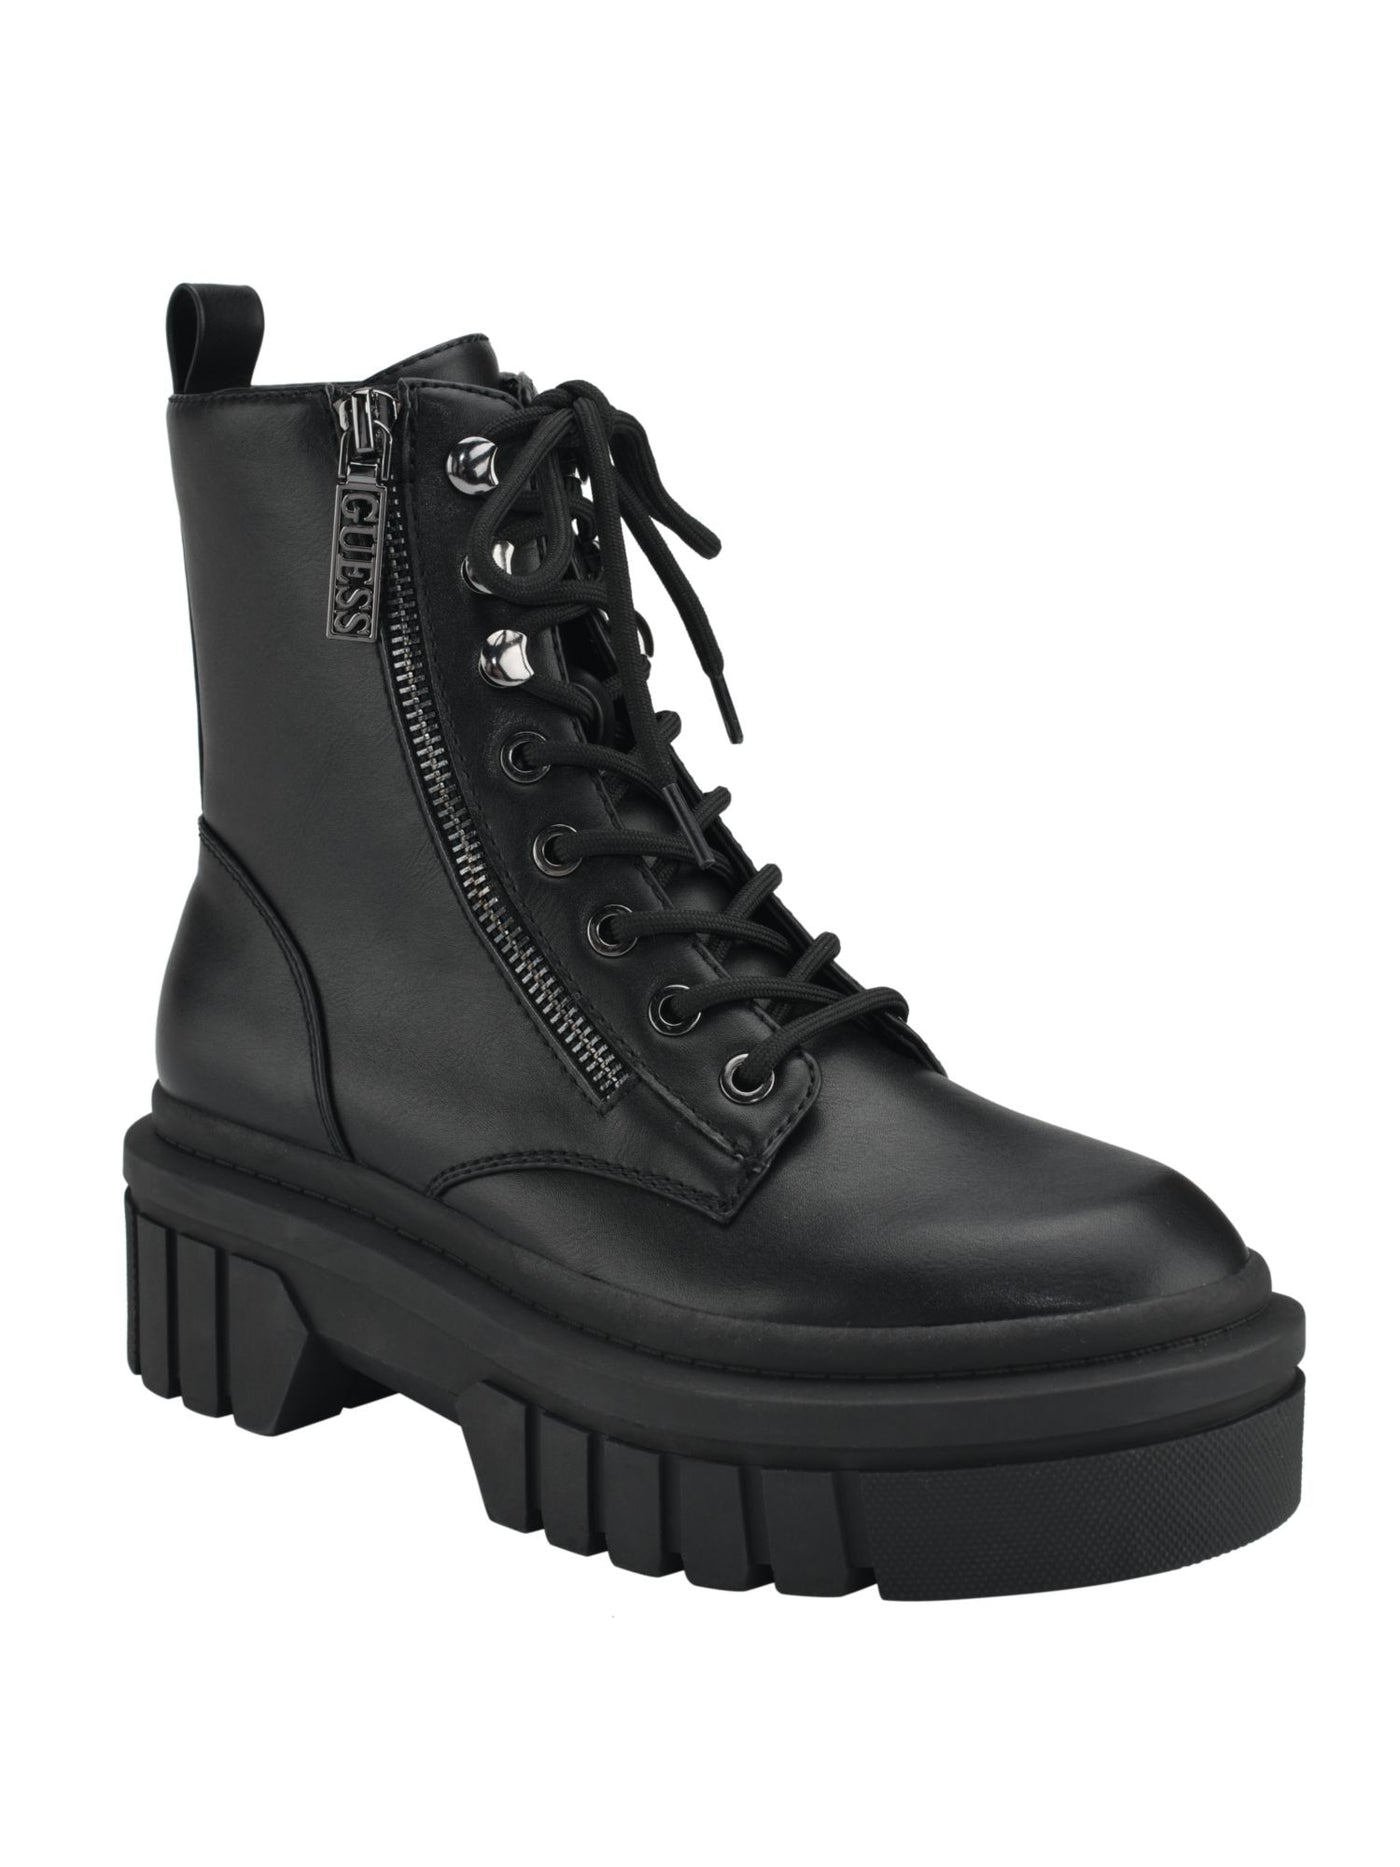 GUESS Womens Black Iridescent Lace Up Padded Pull Tab Lug Sole Zipper Accent Ferina Round Toe Block Heel Zip-Up Combat Boots 11 M